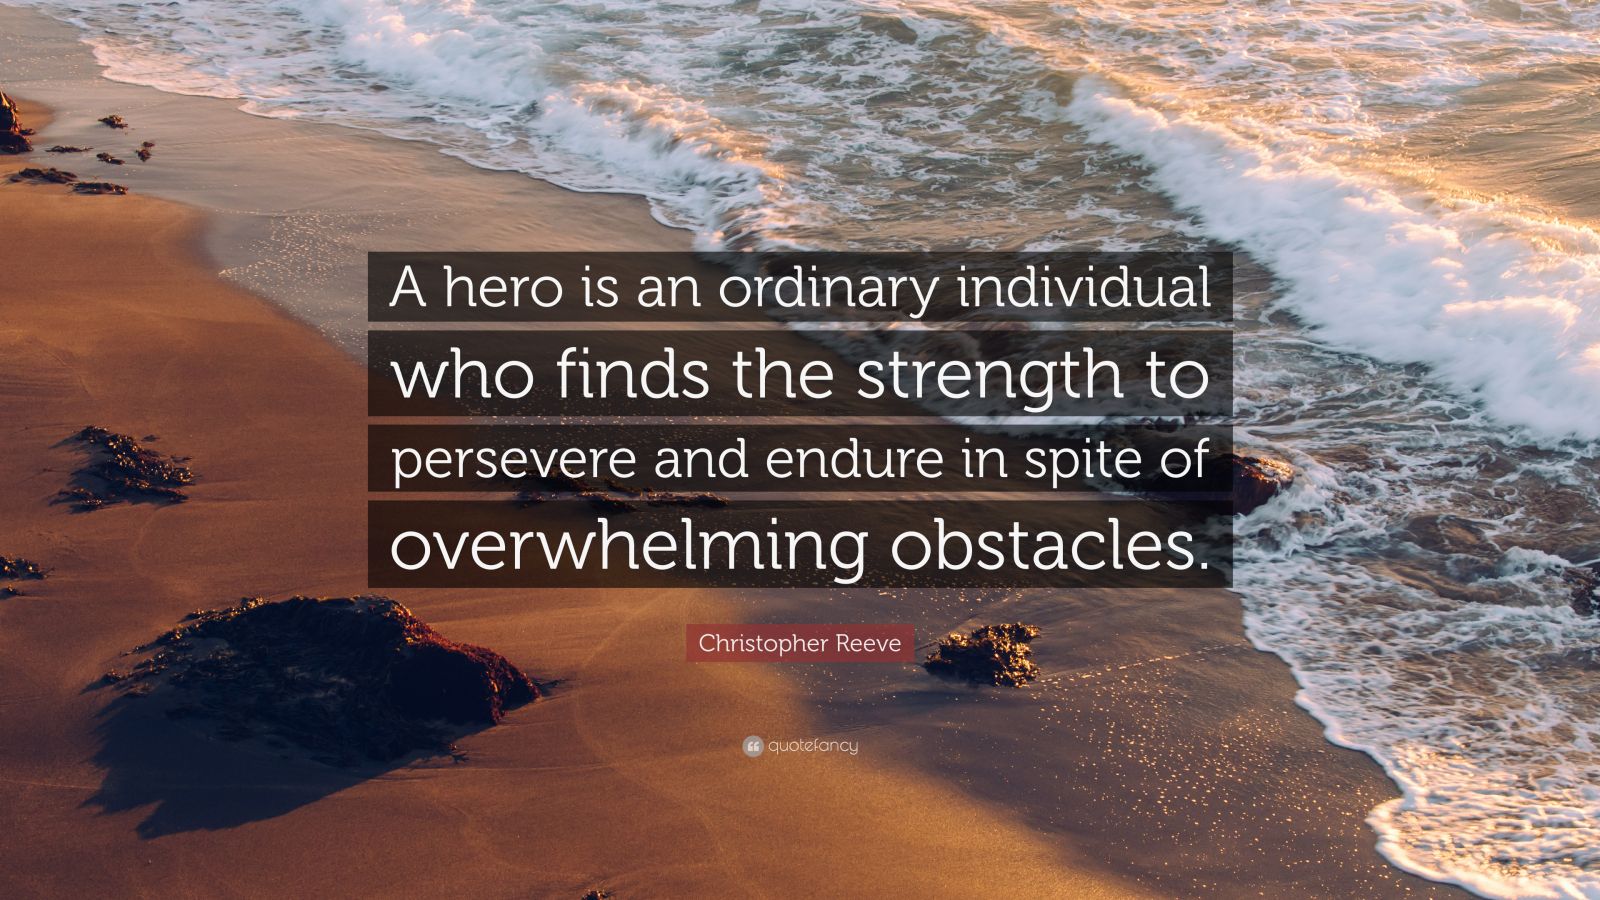 2013778 Christopher Reeve Quote A hero is an ordinary individual who finds